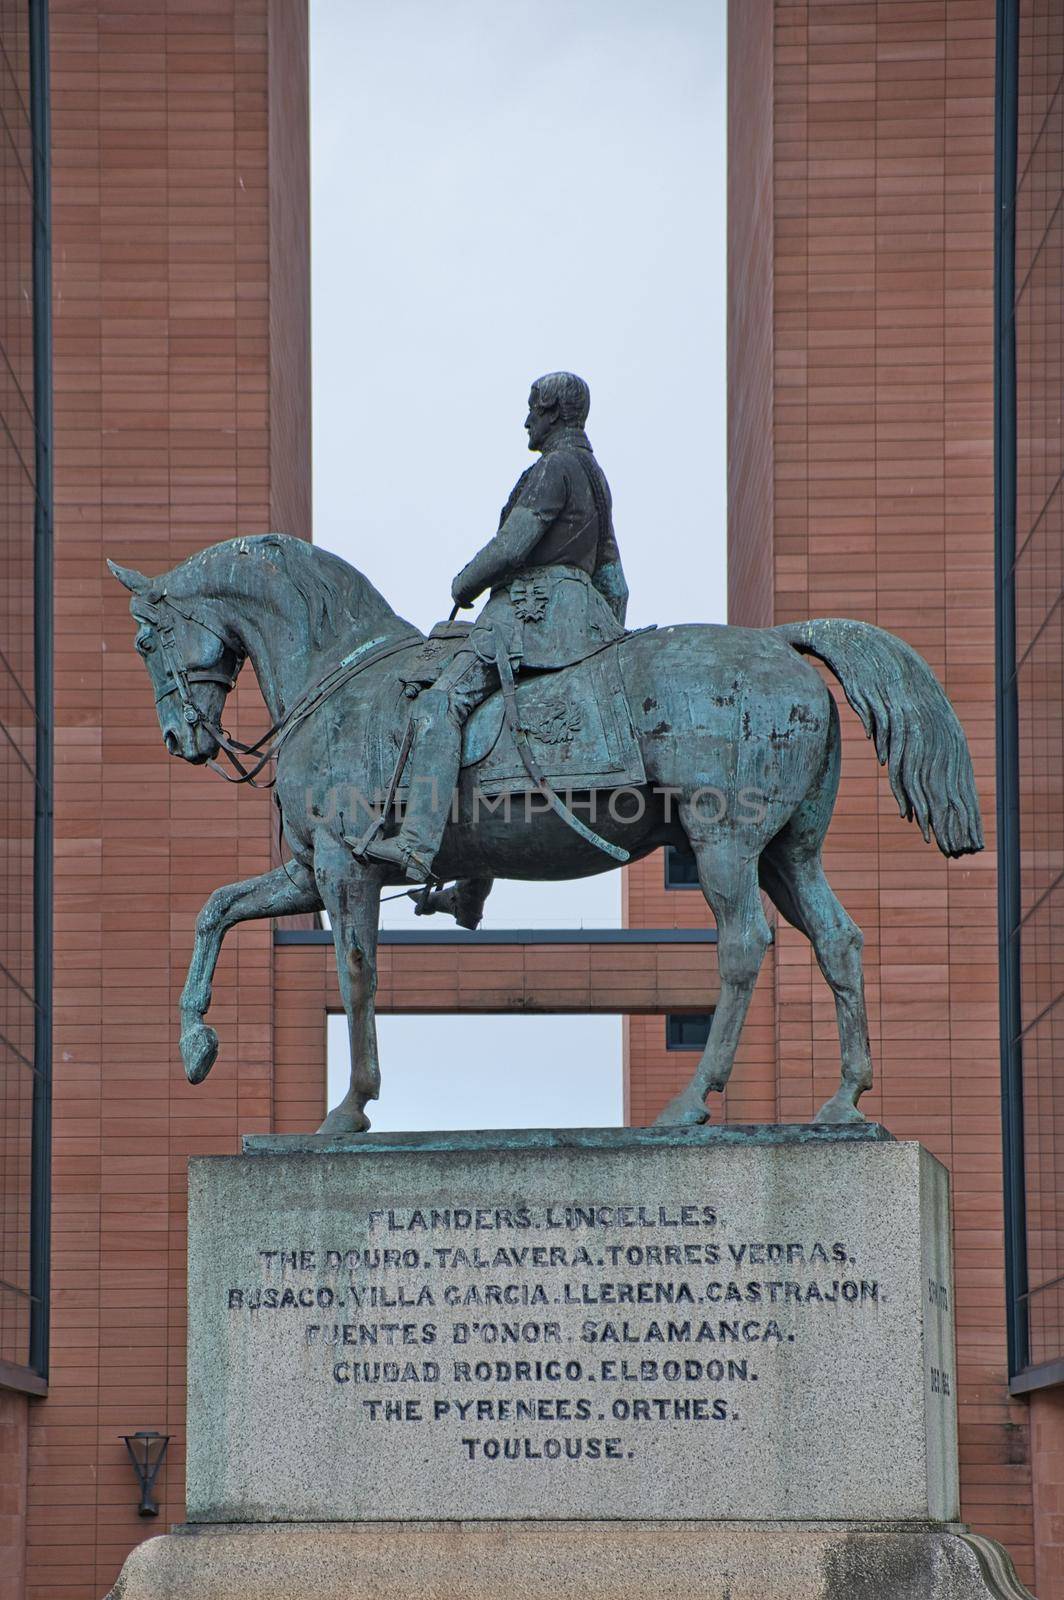 The Equestrian Statue of Viscount Combermere stands on an island in Grosvenor Road, Chester, Cheshire, England, opposite the entrance to Chester Castle. It commemorates his successful military career, and was made by Carlo Marochetti